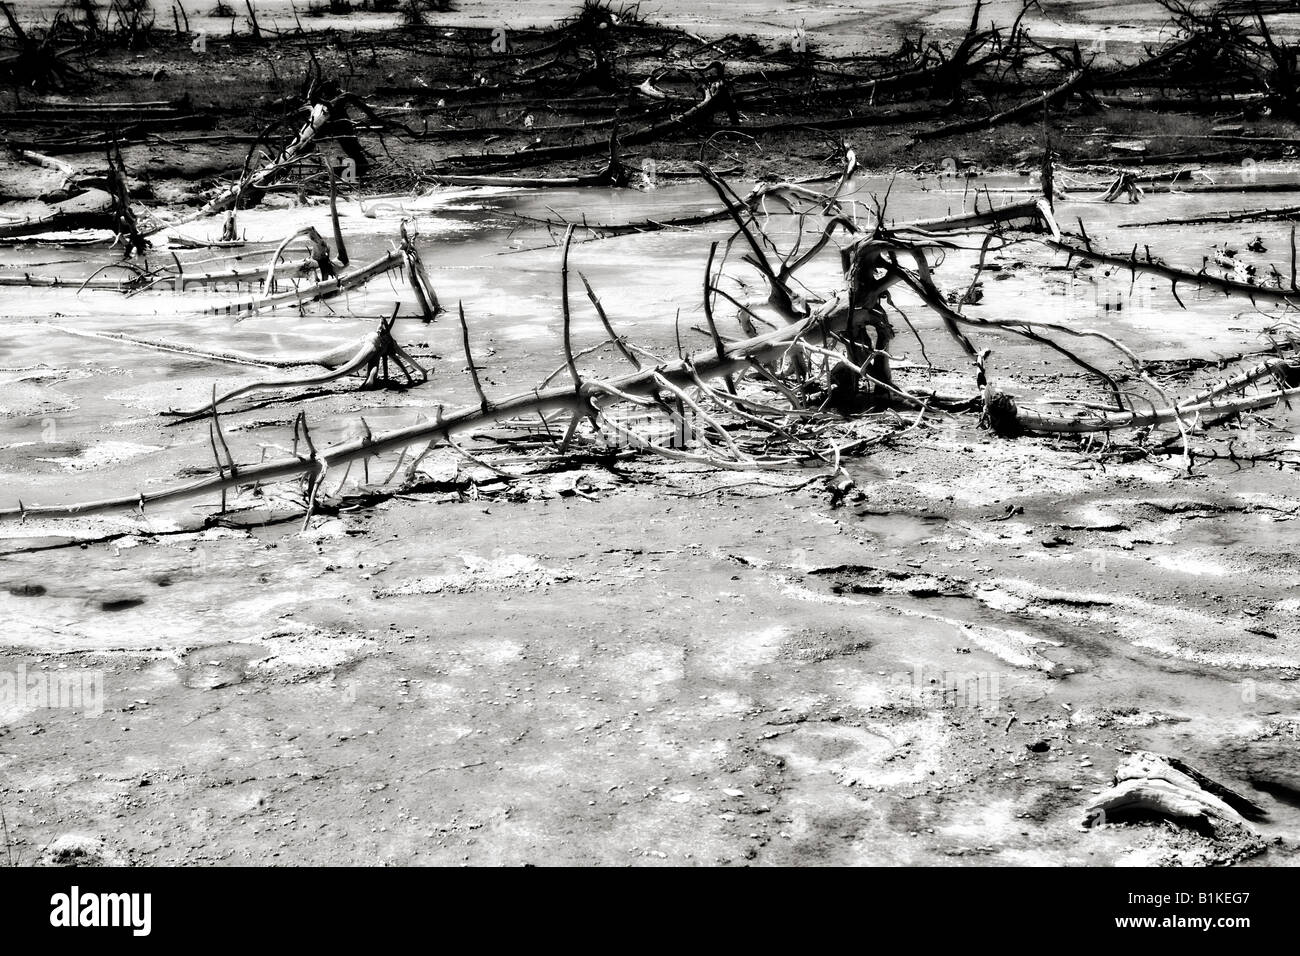 Image of a dead bleached tree skeleton laying in a pool of water in a lunar like landscape Stock Photo